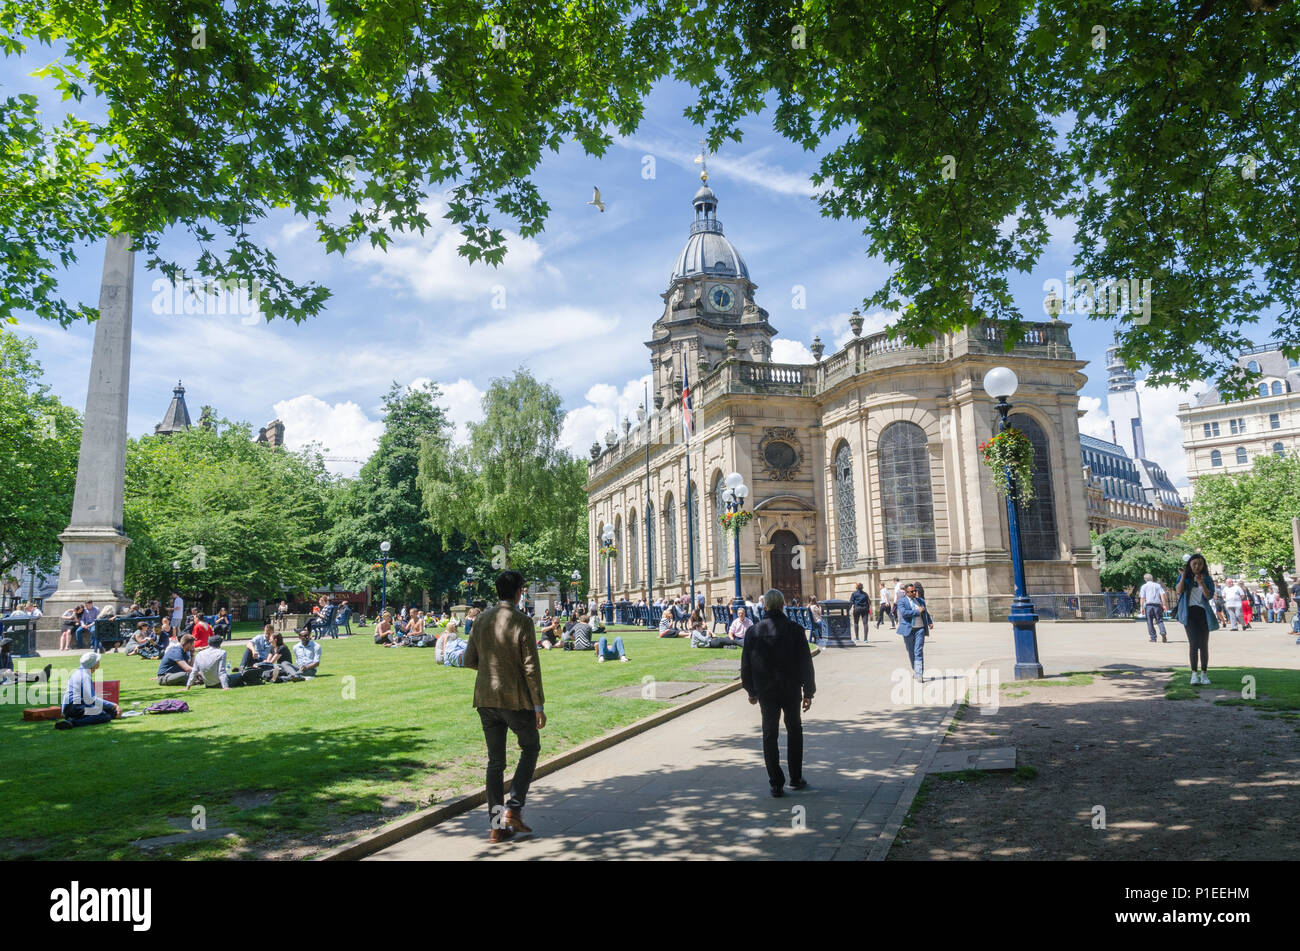 The grounds around St Philip's Cathedral in the centre of Birmingham, UK with people sitting on the grass in the sunshine Stock Photo